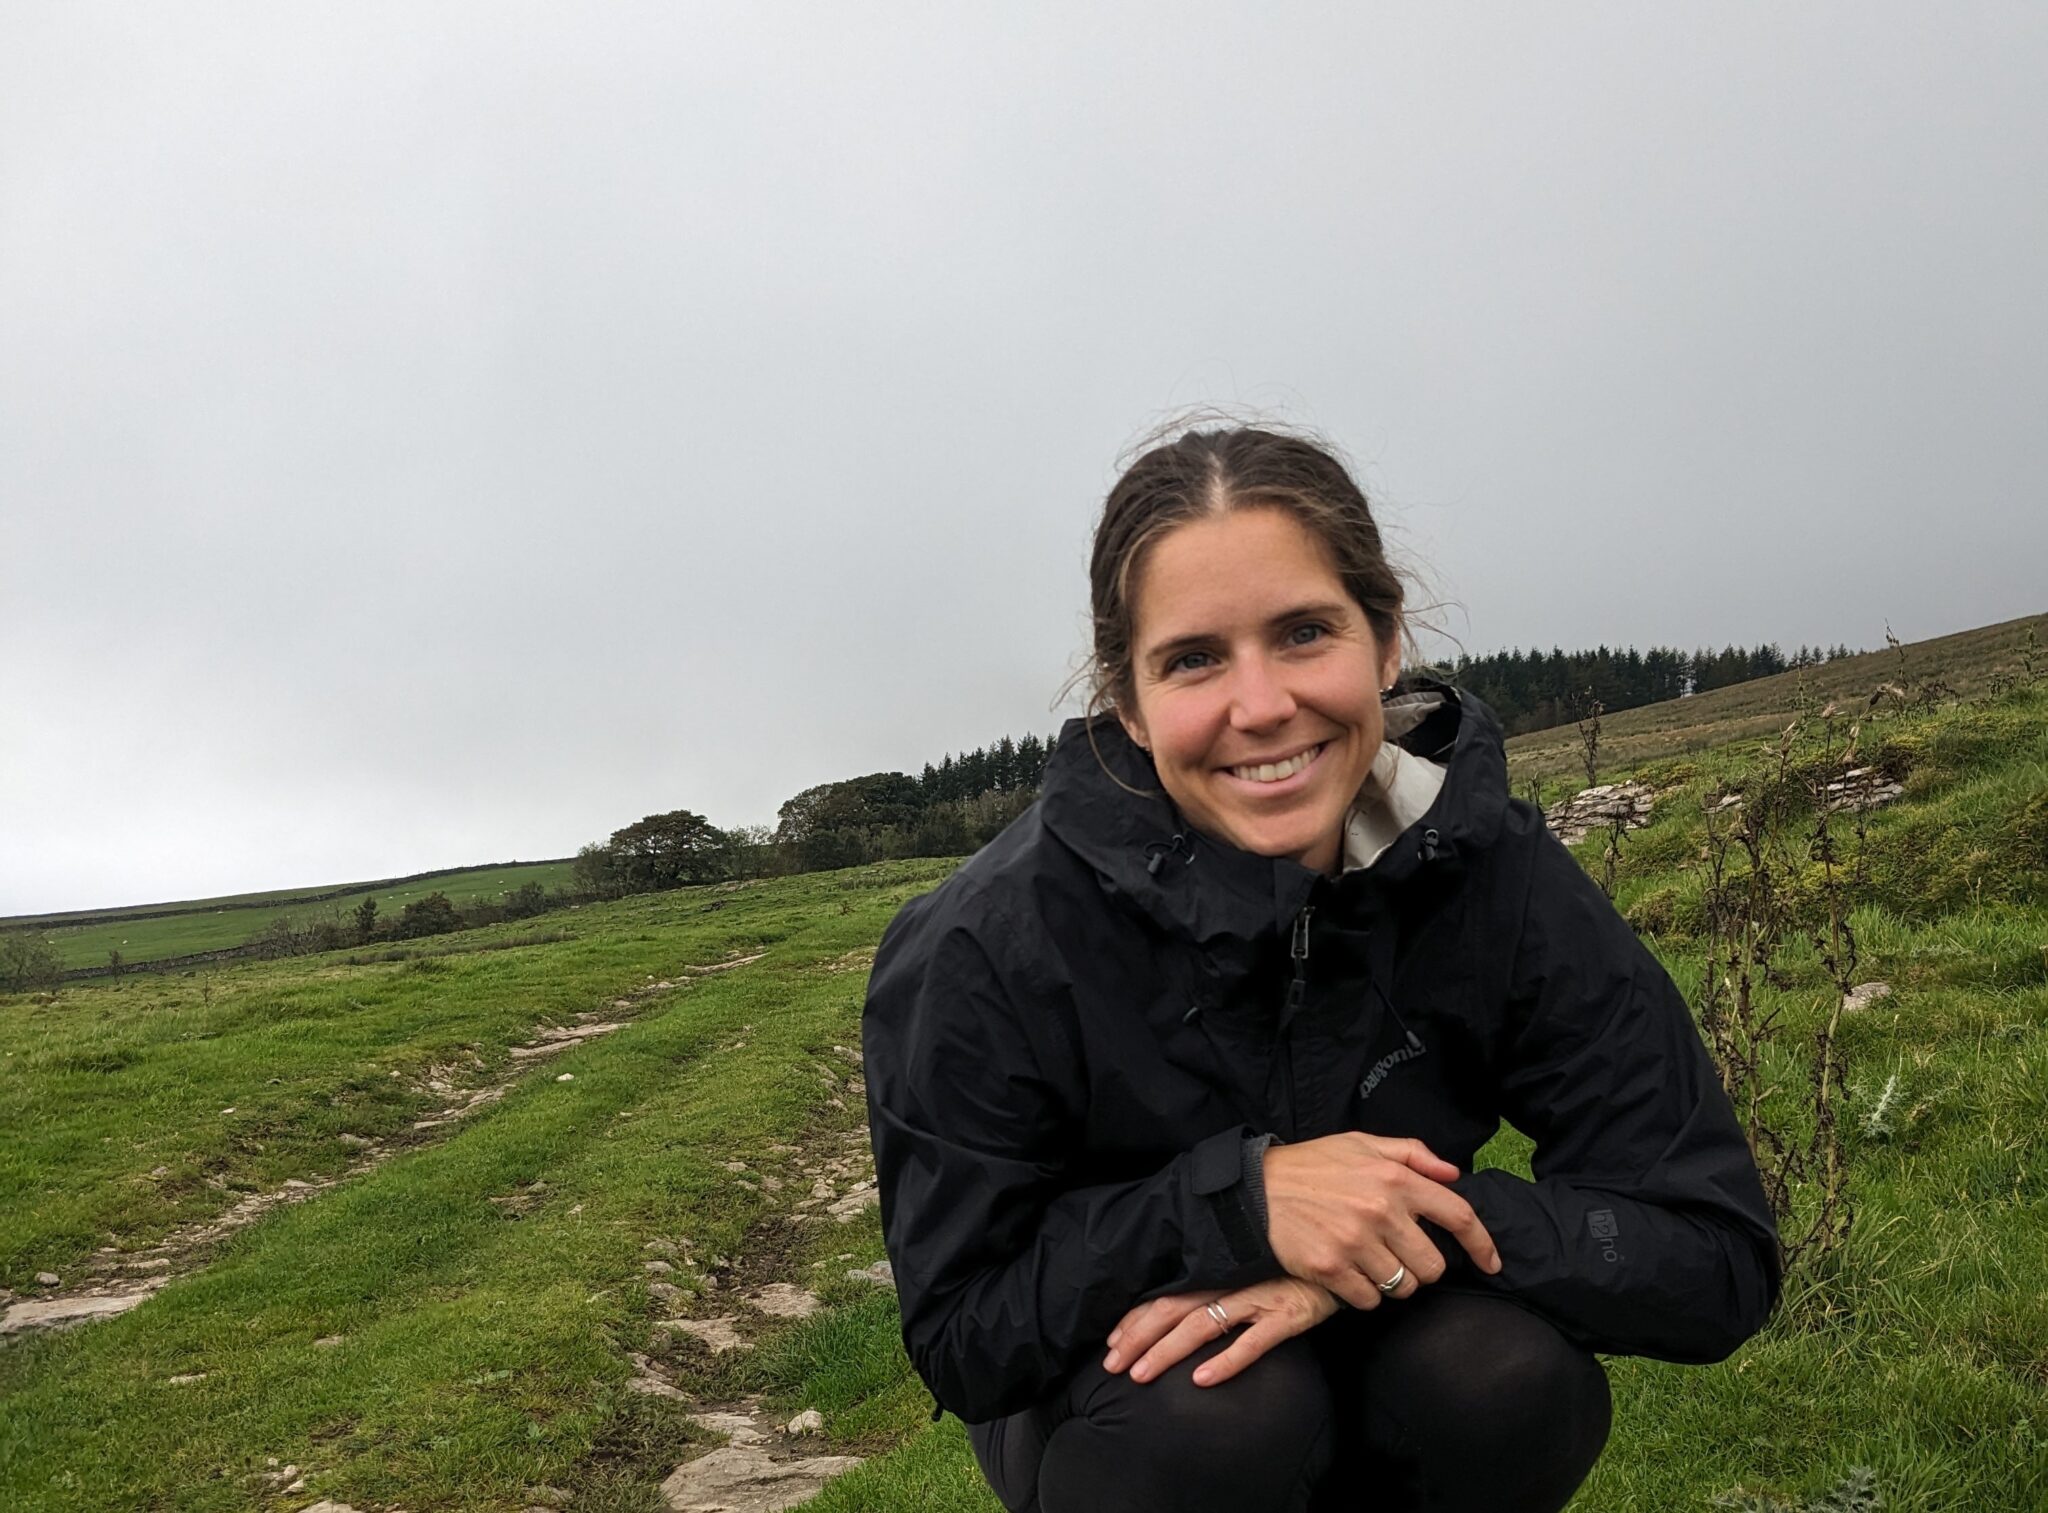 brown haired girl smiling at the camera with a black rain jacket on a green field